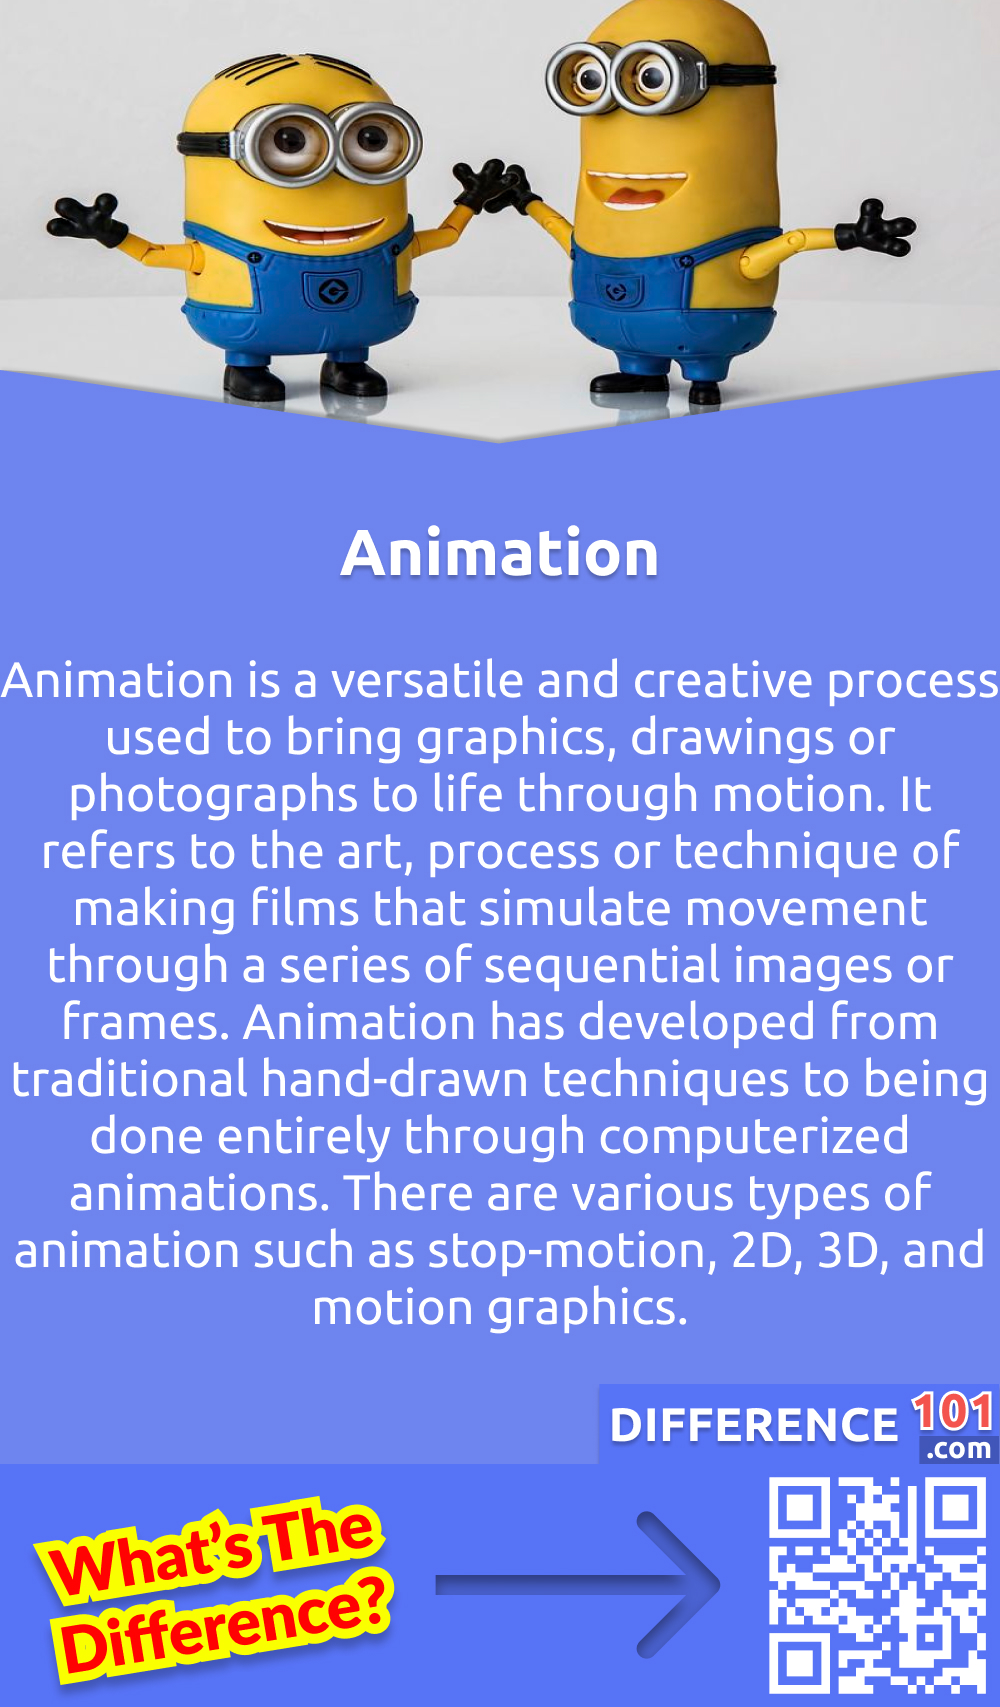 What Is Animation? Animation is a versatile and creative process used to bring graphics, drawings or photographs to life through motion. It refers to the art, process or technique of making films that simulate movement through a series of sequential images or frames. Animation has developed from traditional hand-drawn techniques to being done entirely through computerized animations. There are various types of animation such as stop-motion, 2D, 3D, and motion graphics. Animators use different software such as Adobe After Effects, Maya, and Cinema 4D to create seamless and captivating animation. Quality animation requires great skill and attention to detail, and it is used across various industries, including entertainment, education, and advertising.